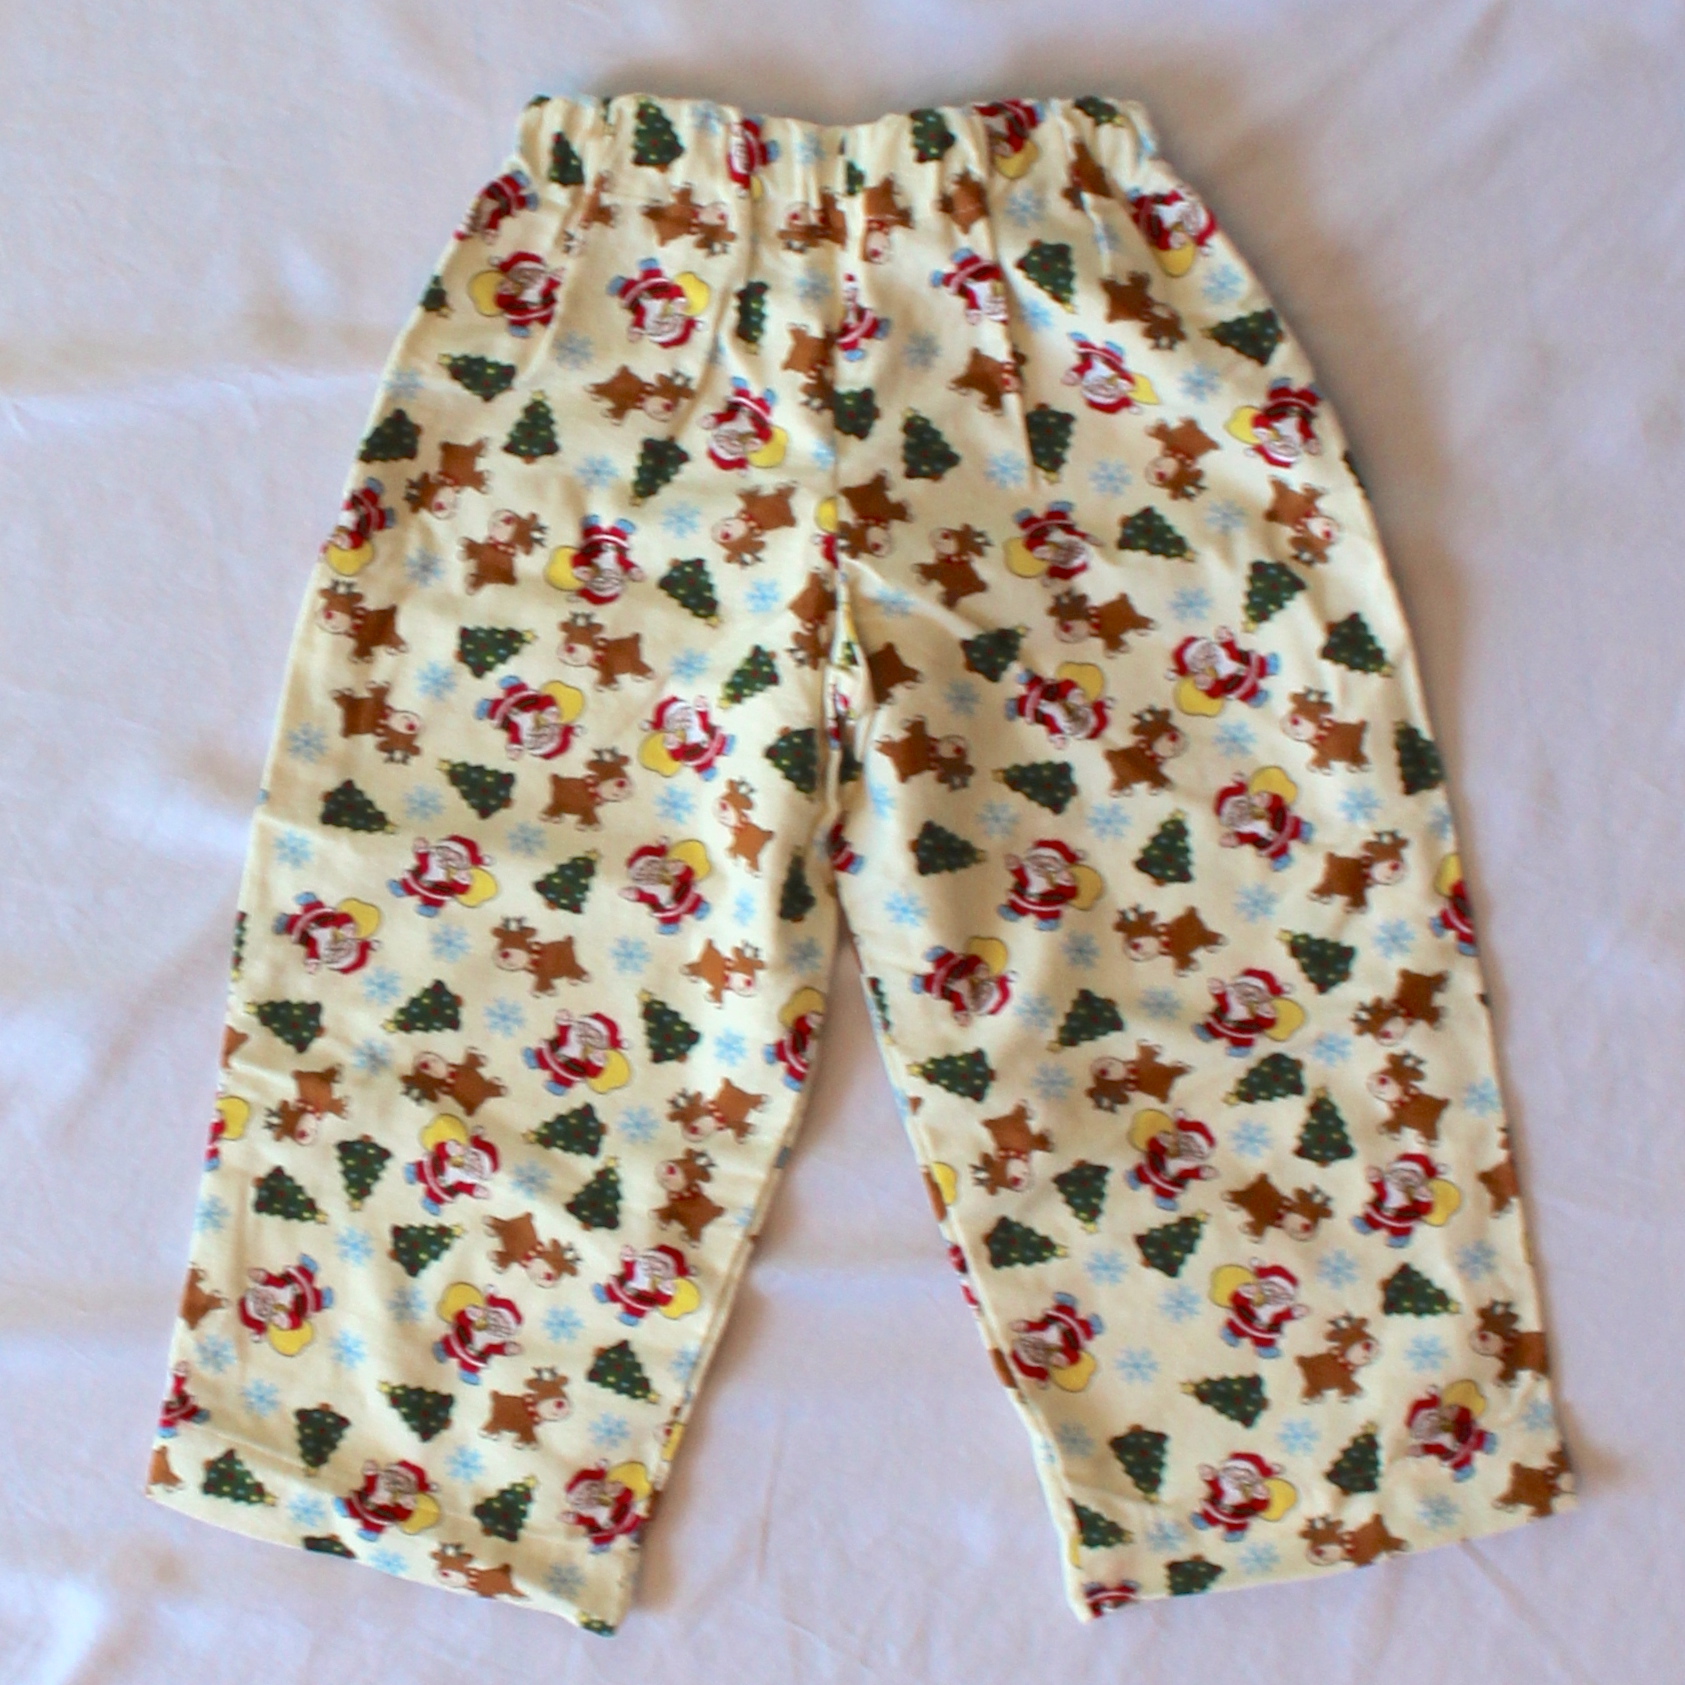 Christmas Tree, Rudolph, and Santa Flannel Pants - Size 18 months